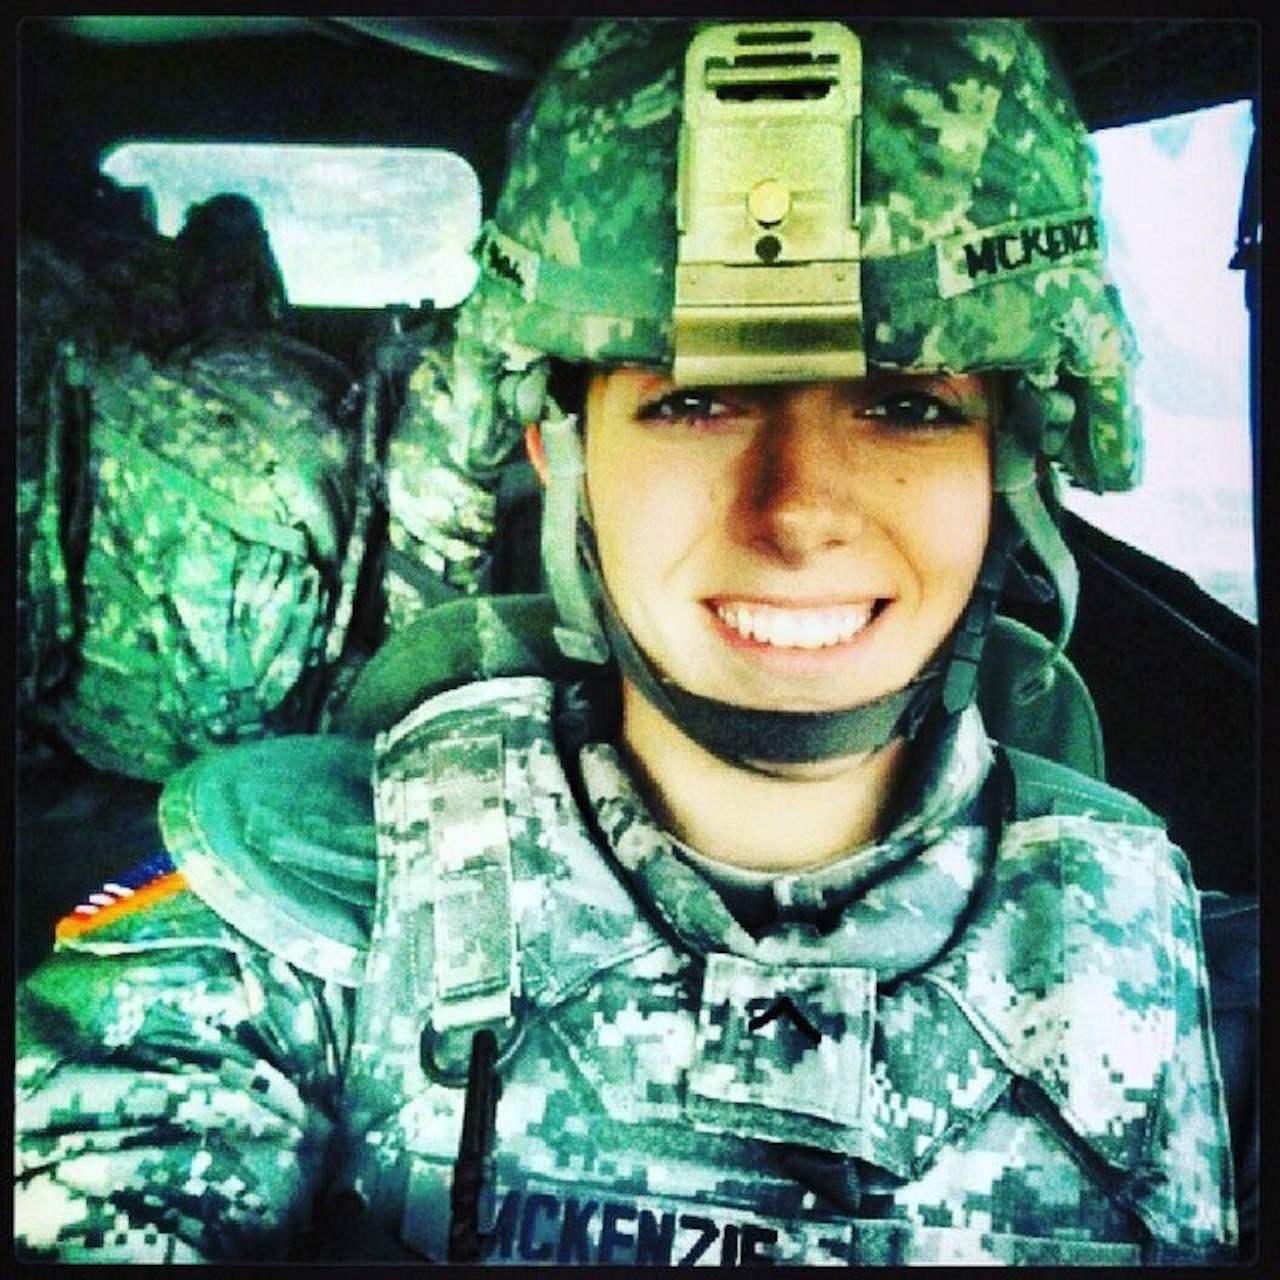 New York Army National Guard Spc.  Nicole McKenzie, shown here in a personal photo, a member of Company sA, 101st Expeditionary Signal Battalion, used her combat life saver skills to help save the life of a 12-year old boy who jumped from an overpass in Yonkers, N.Y. on August 3, 2018.